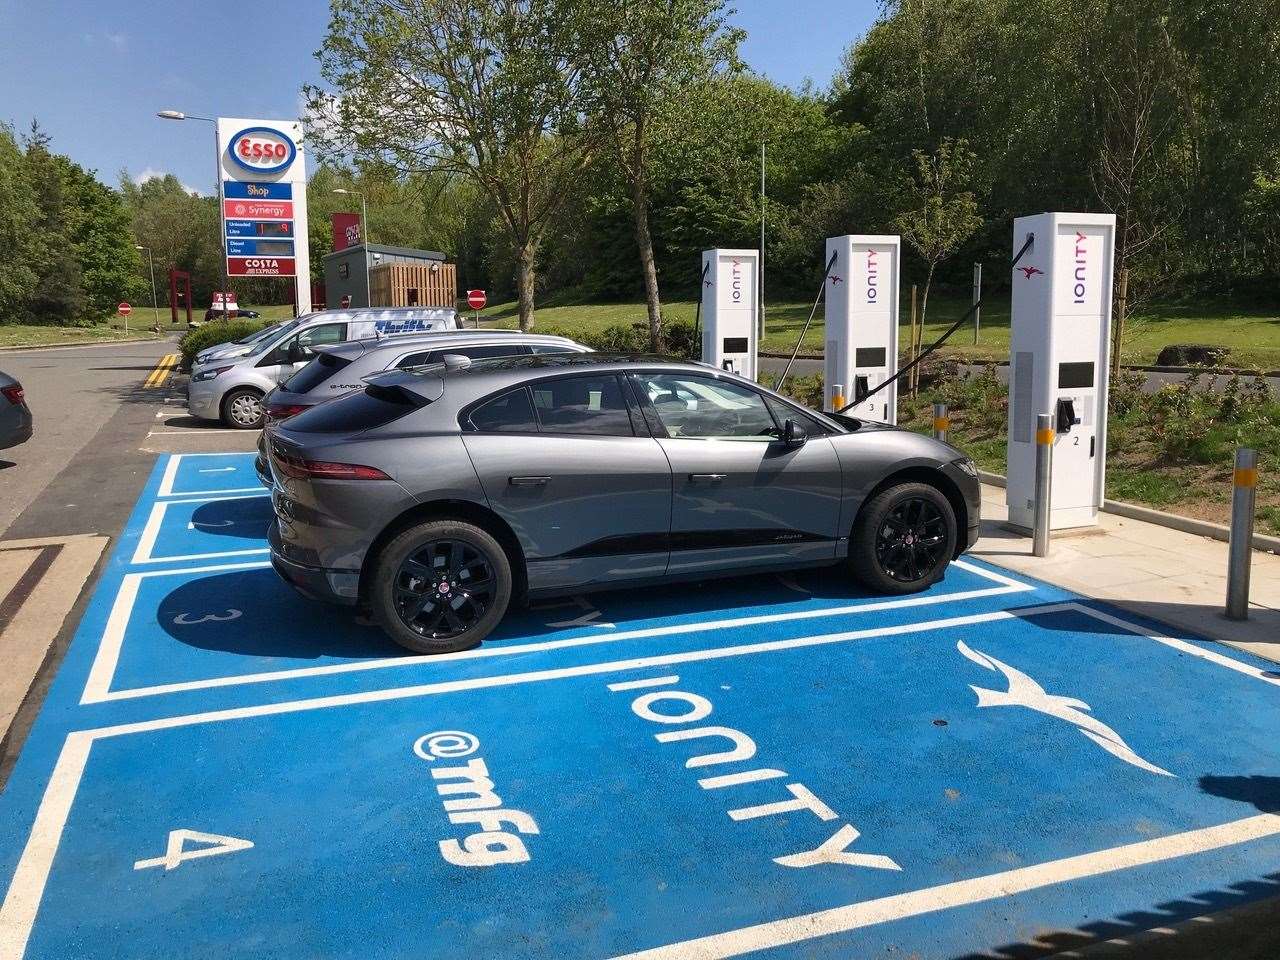 The new 350kw charging station installed at Maidstone services (10999427)